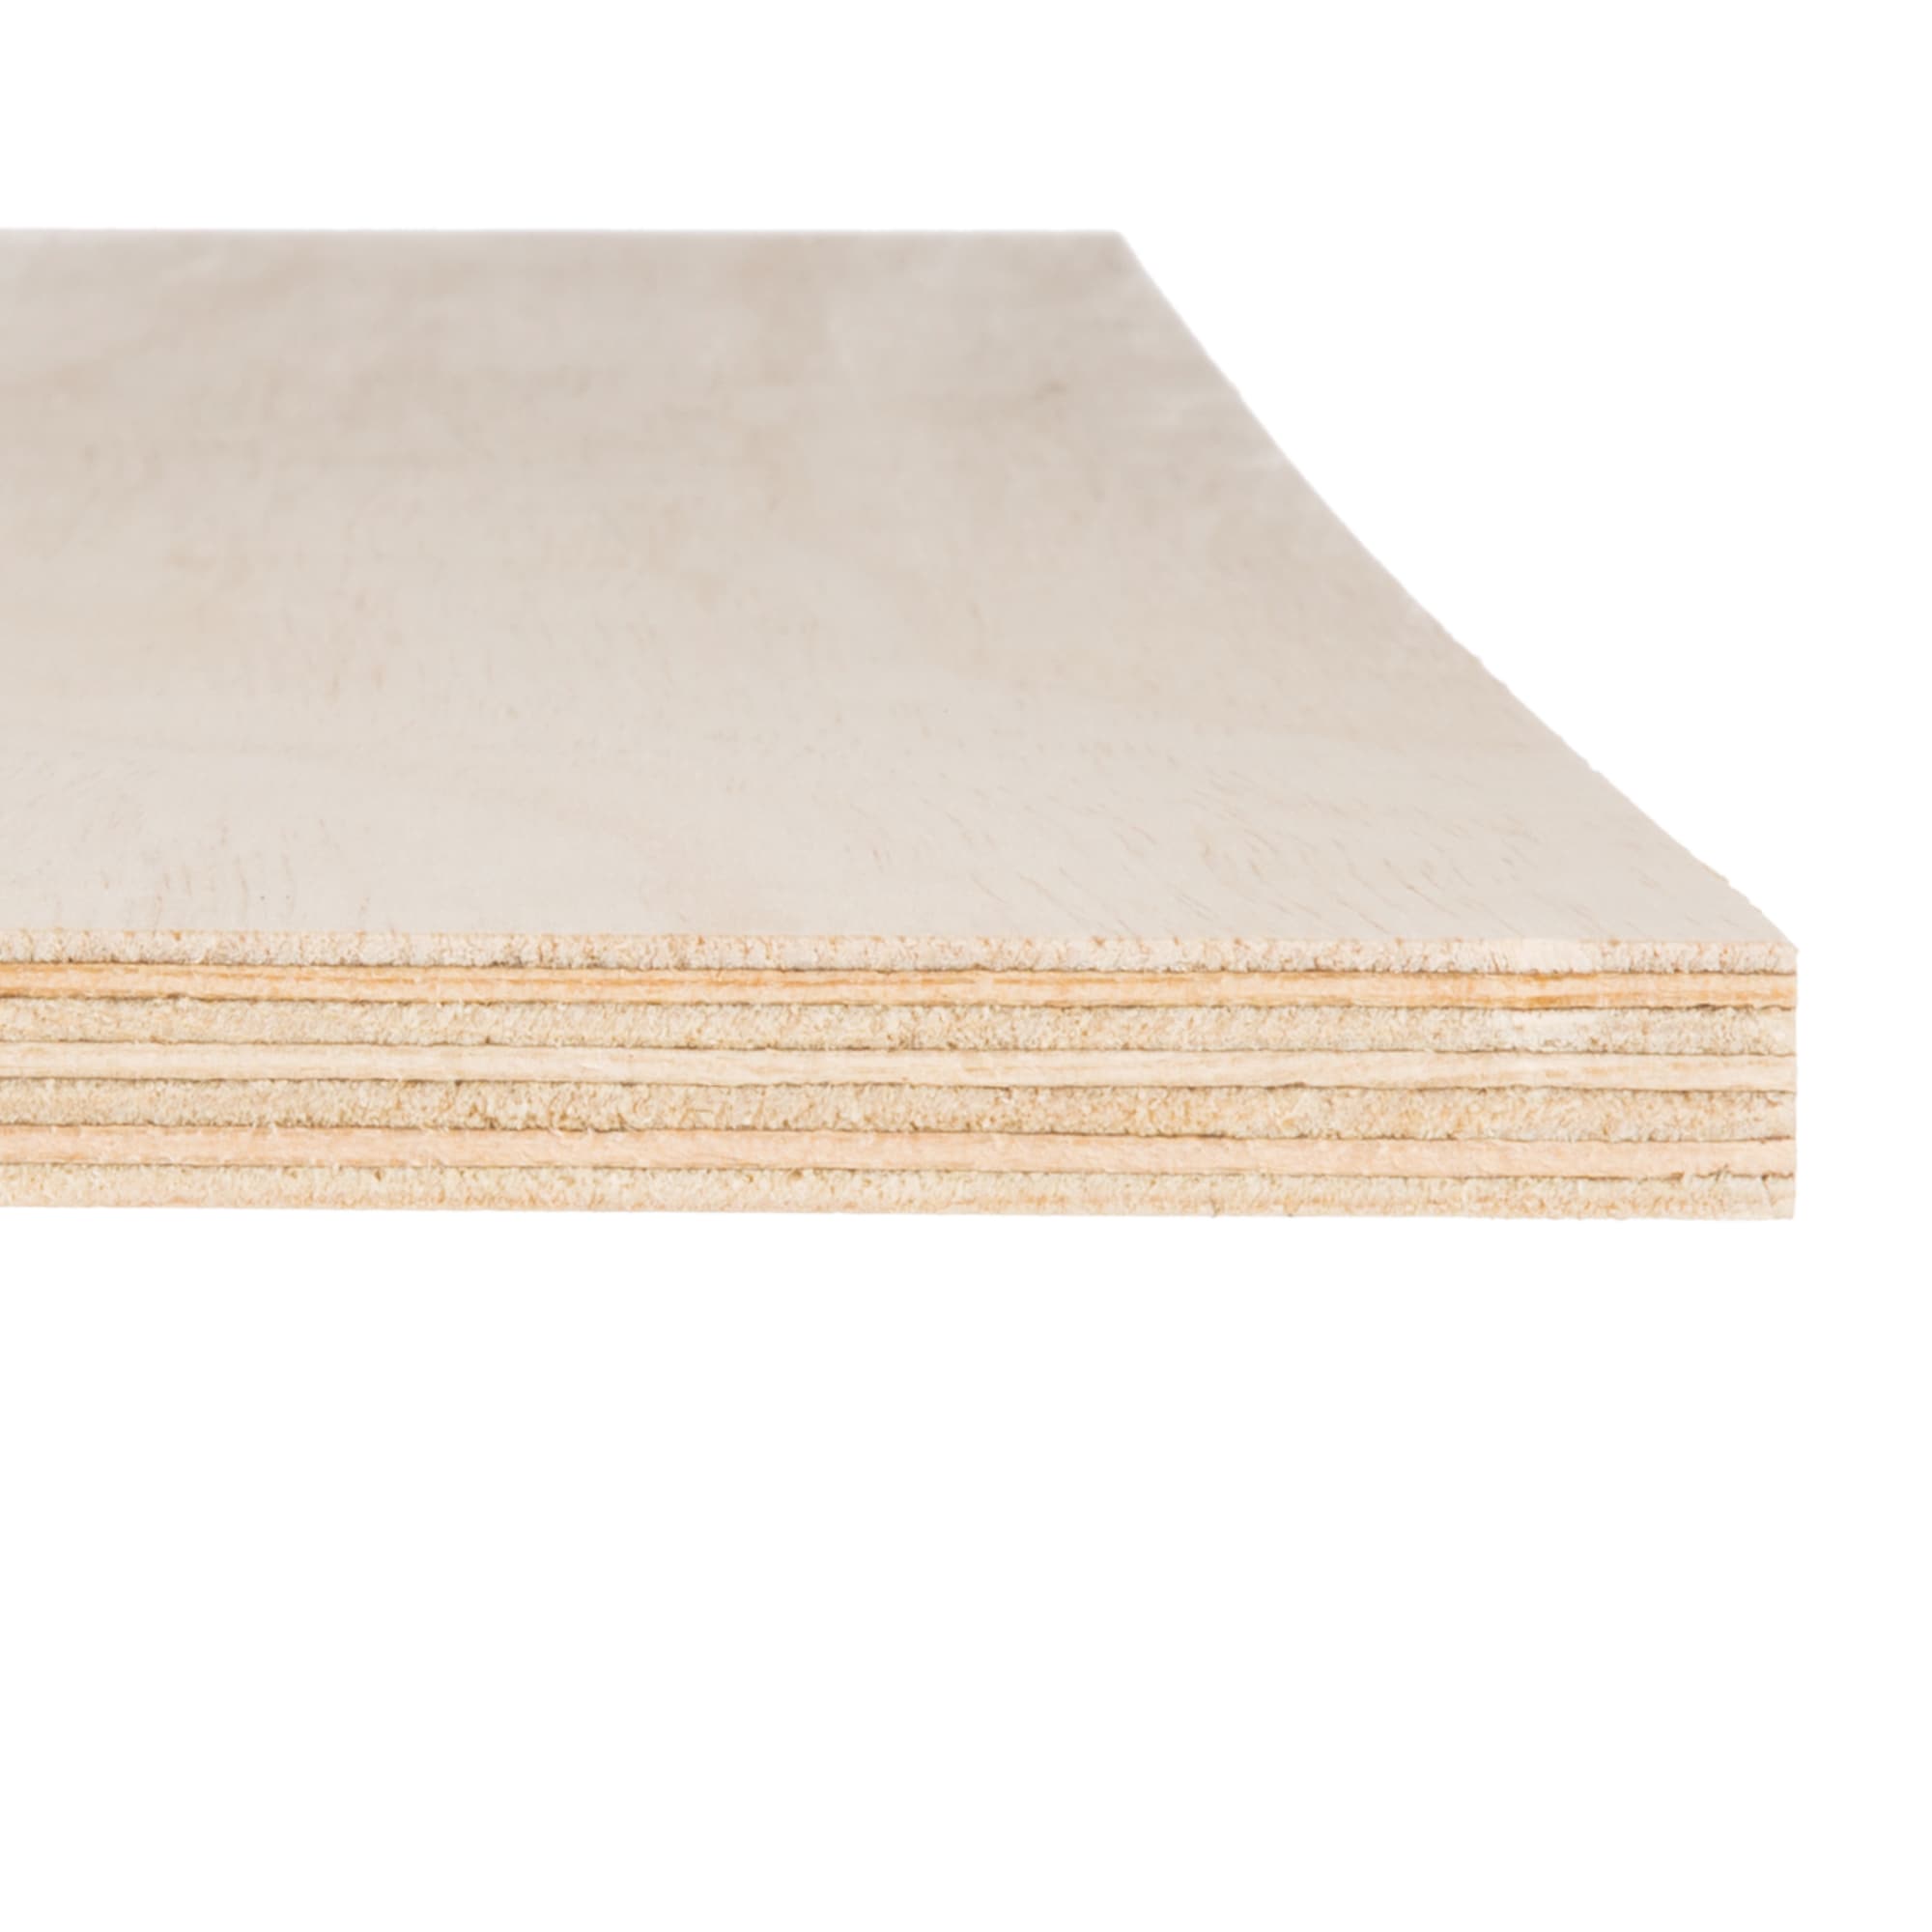 Sutherlands 4x8 4 x 8-Foot X 23/32-Inch Apa Tongue Groove Underlayment  Plywood at Sutherlands